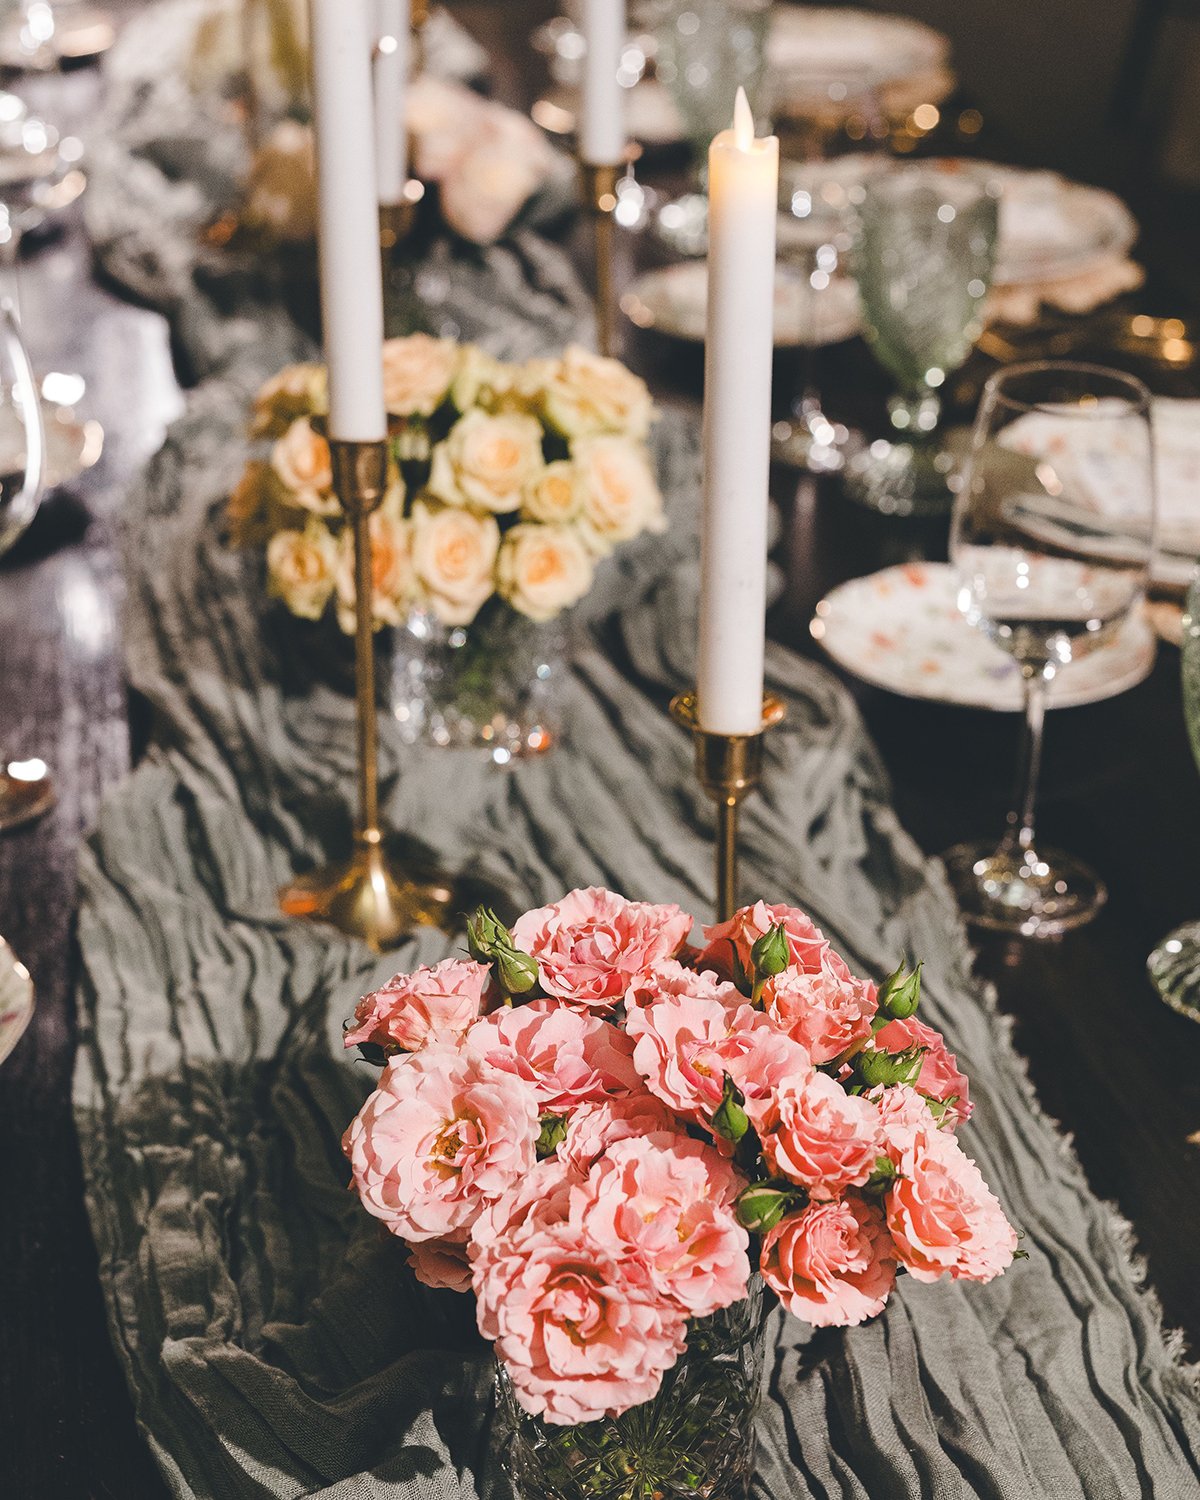 Did you know that our Rose Collection can be ordered in multiple shades and even rose sizes?

From Spray Roses (shown here) to large garden roses, we'll help you pair the perfect rose color and shape/size to your tablescapes.

Here we used drinking g